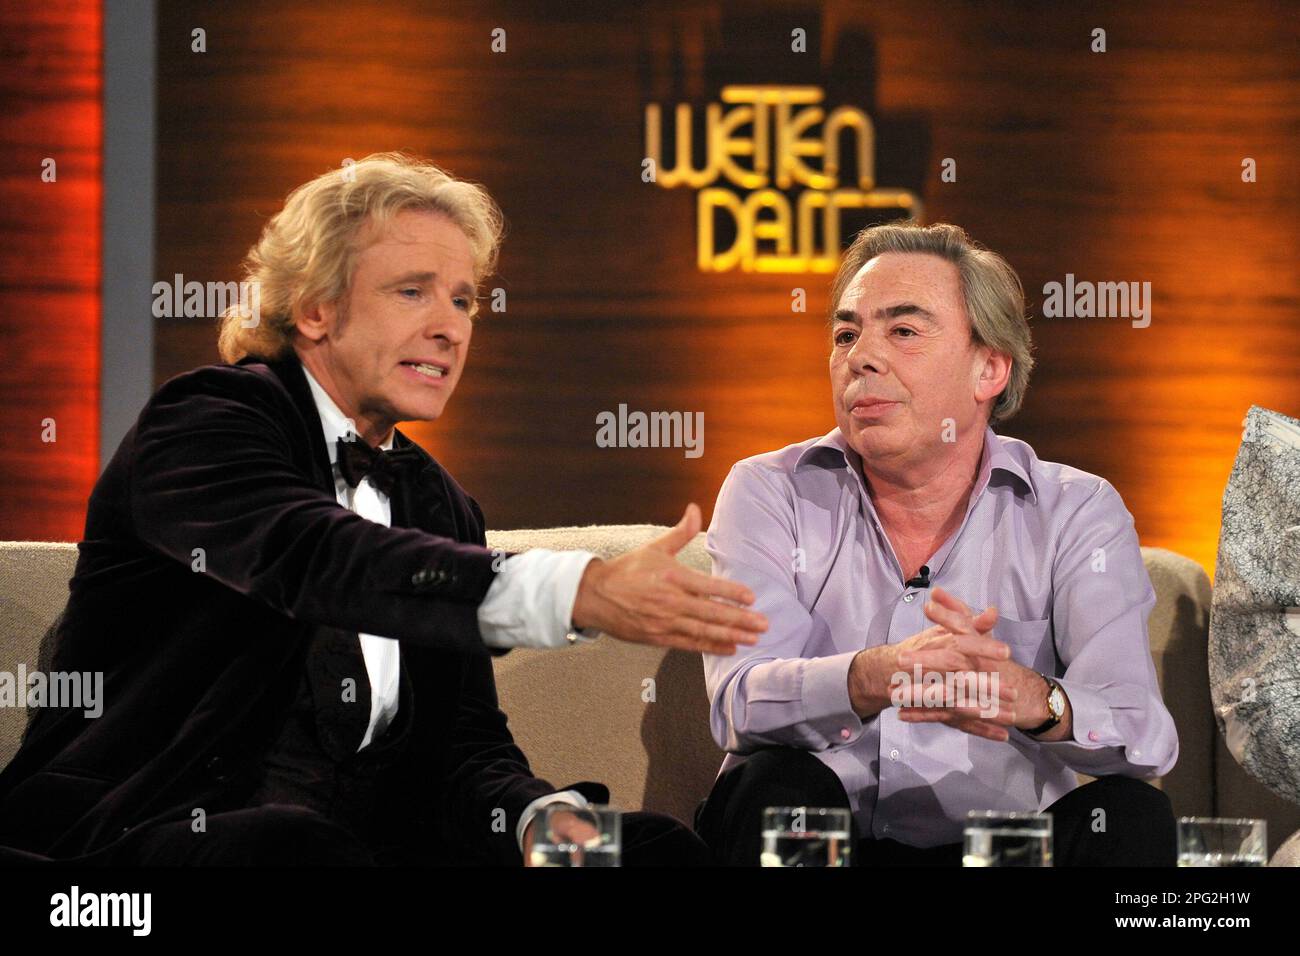 ARCHIVE PHOTO: Andrew LLOYD-WEBBER will be 75 years old on March 22, 2023, talk on the couch with (from left) moderator Thomas GOTTSCHALK, composer Andrew LLOYD WEBBER, bet that.? from Salzburg, 03/27/2010. ?SVEN SIMON#Prinzess-Luise-Strasse 41#45479 Muelheim/R uhr #tel. 0208/9413250#fax. 0208/9413260#GLSB bank, account no.: 4030 025 100, BLZ 430 609 67# www.SvenSimon.net. Stock Photo